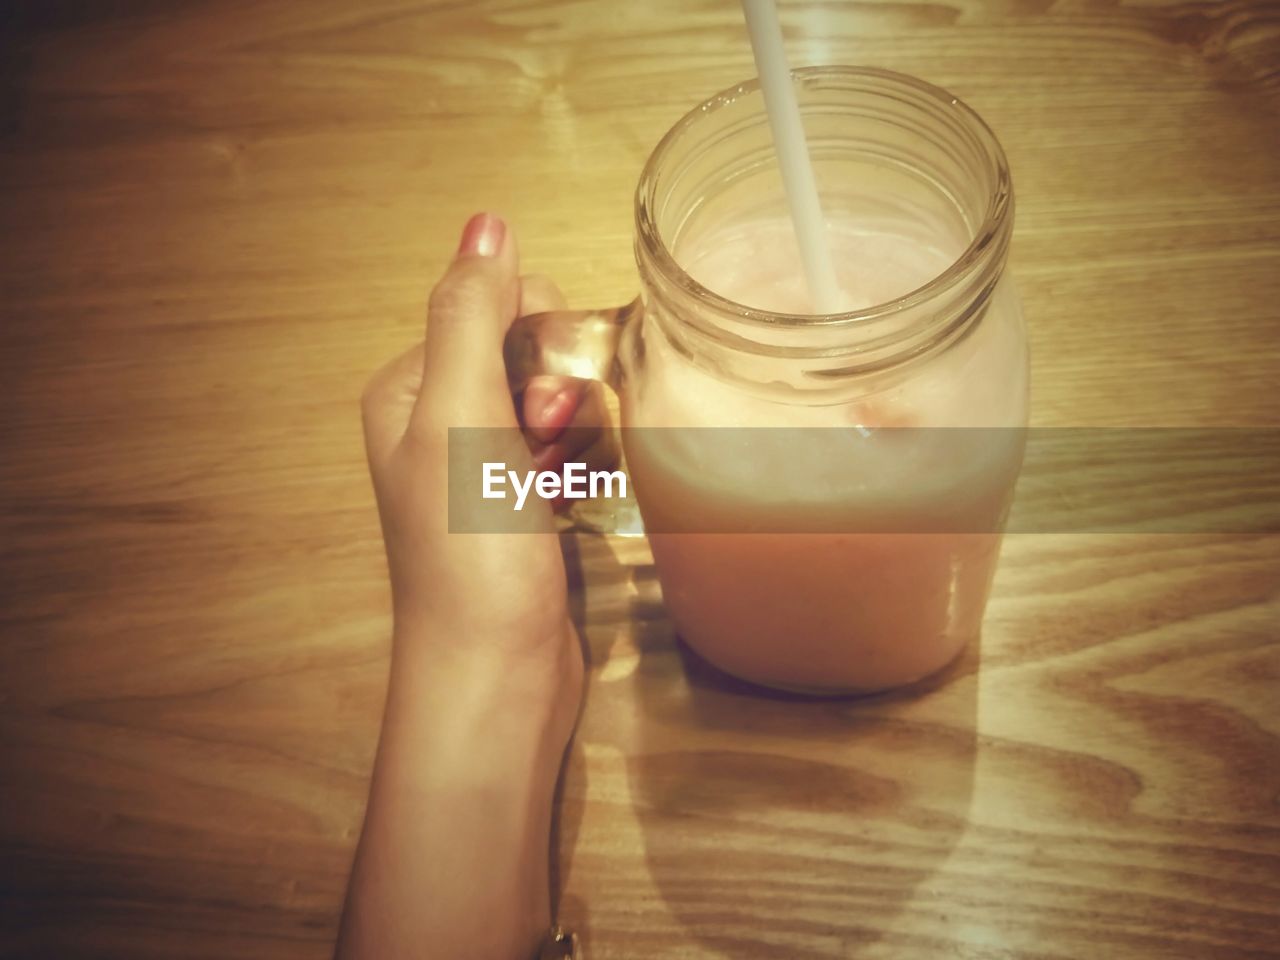 CROPPED IMAGE OF HAND HOLDING DRINK IN JAR